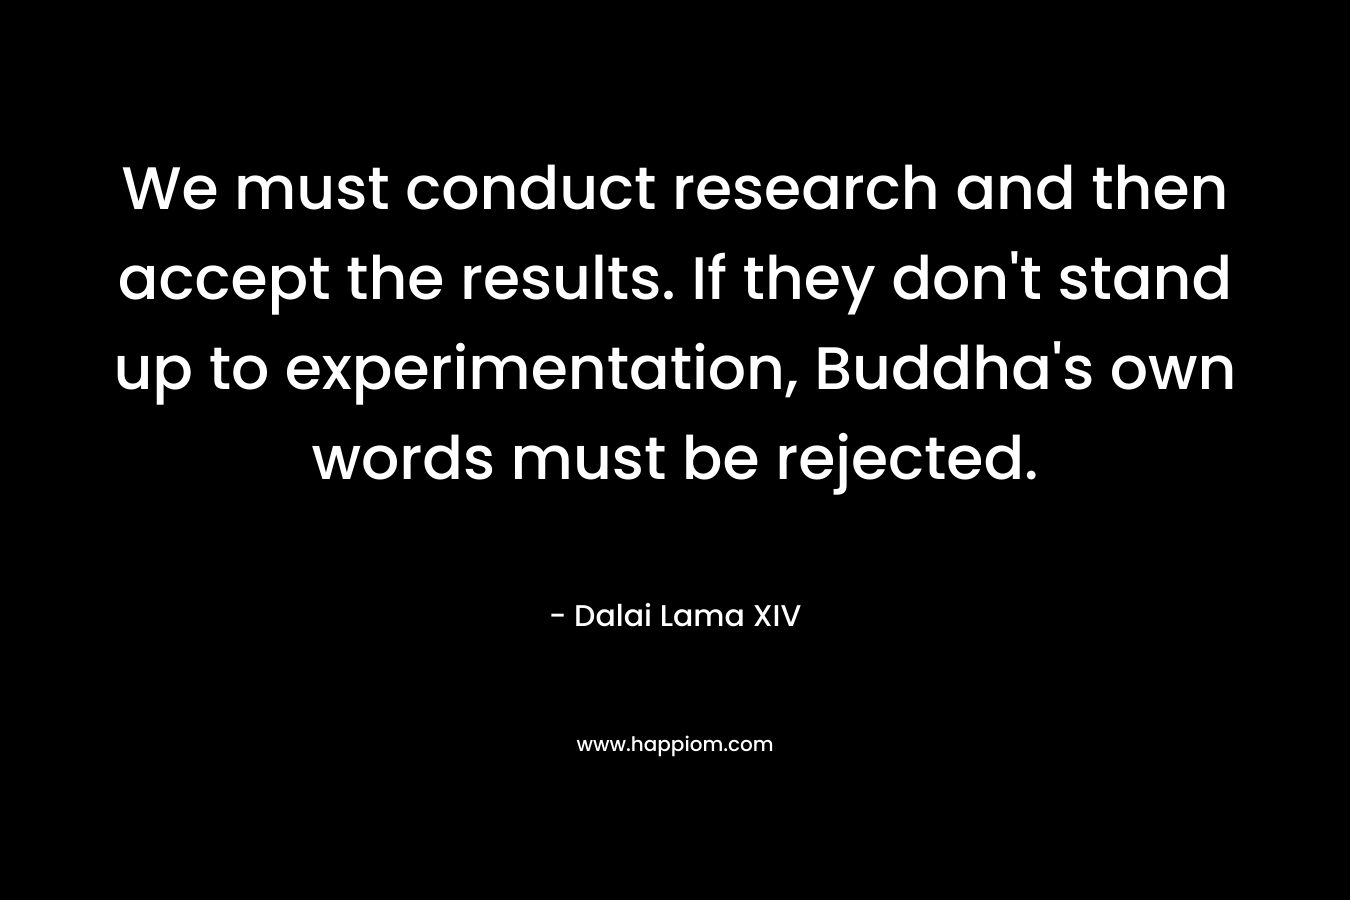 We must conduct research and then accept the results. If they don't stand up to experimentation, Buddha's own words must be rejected.